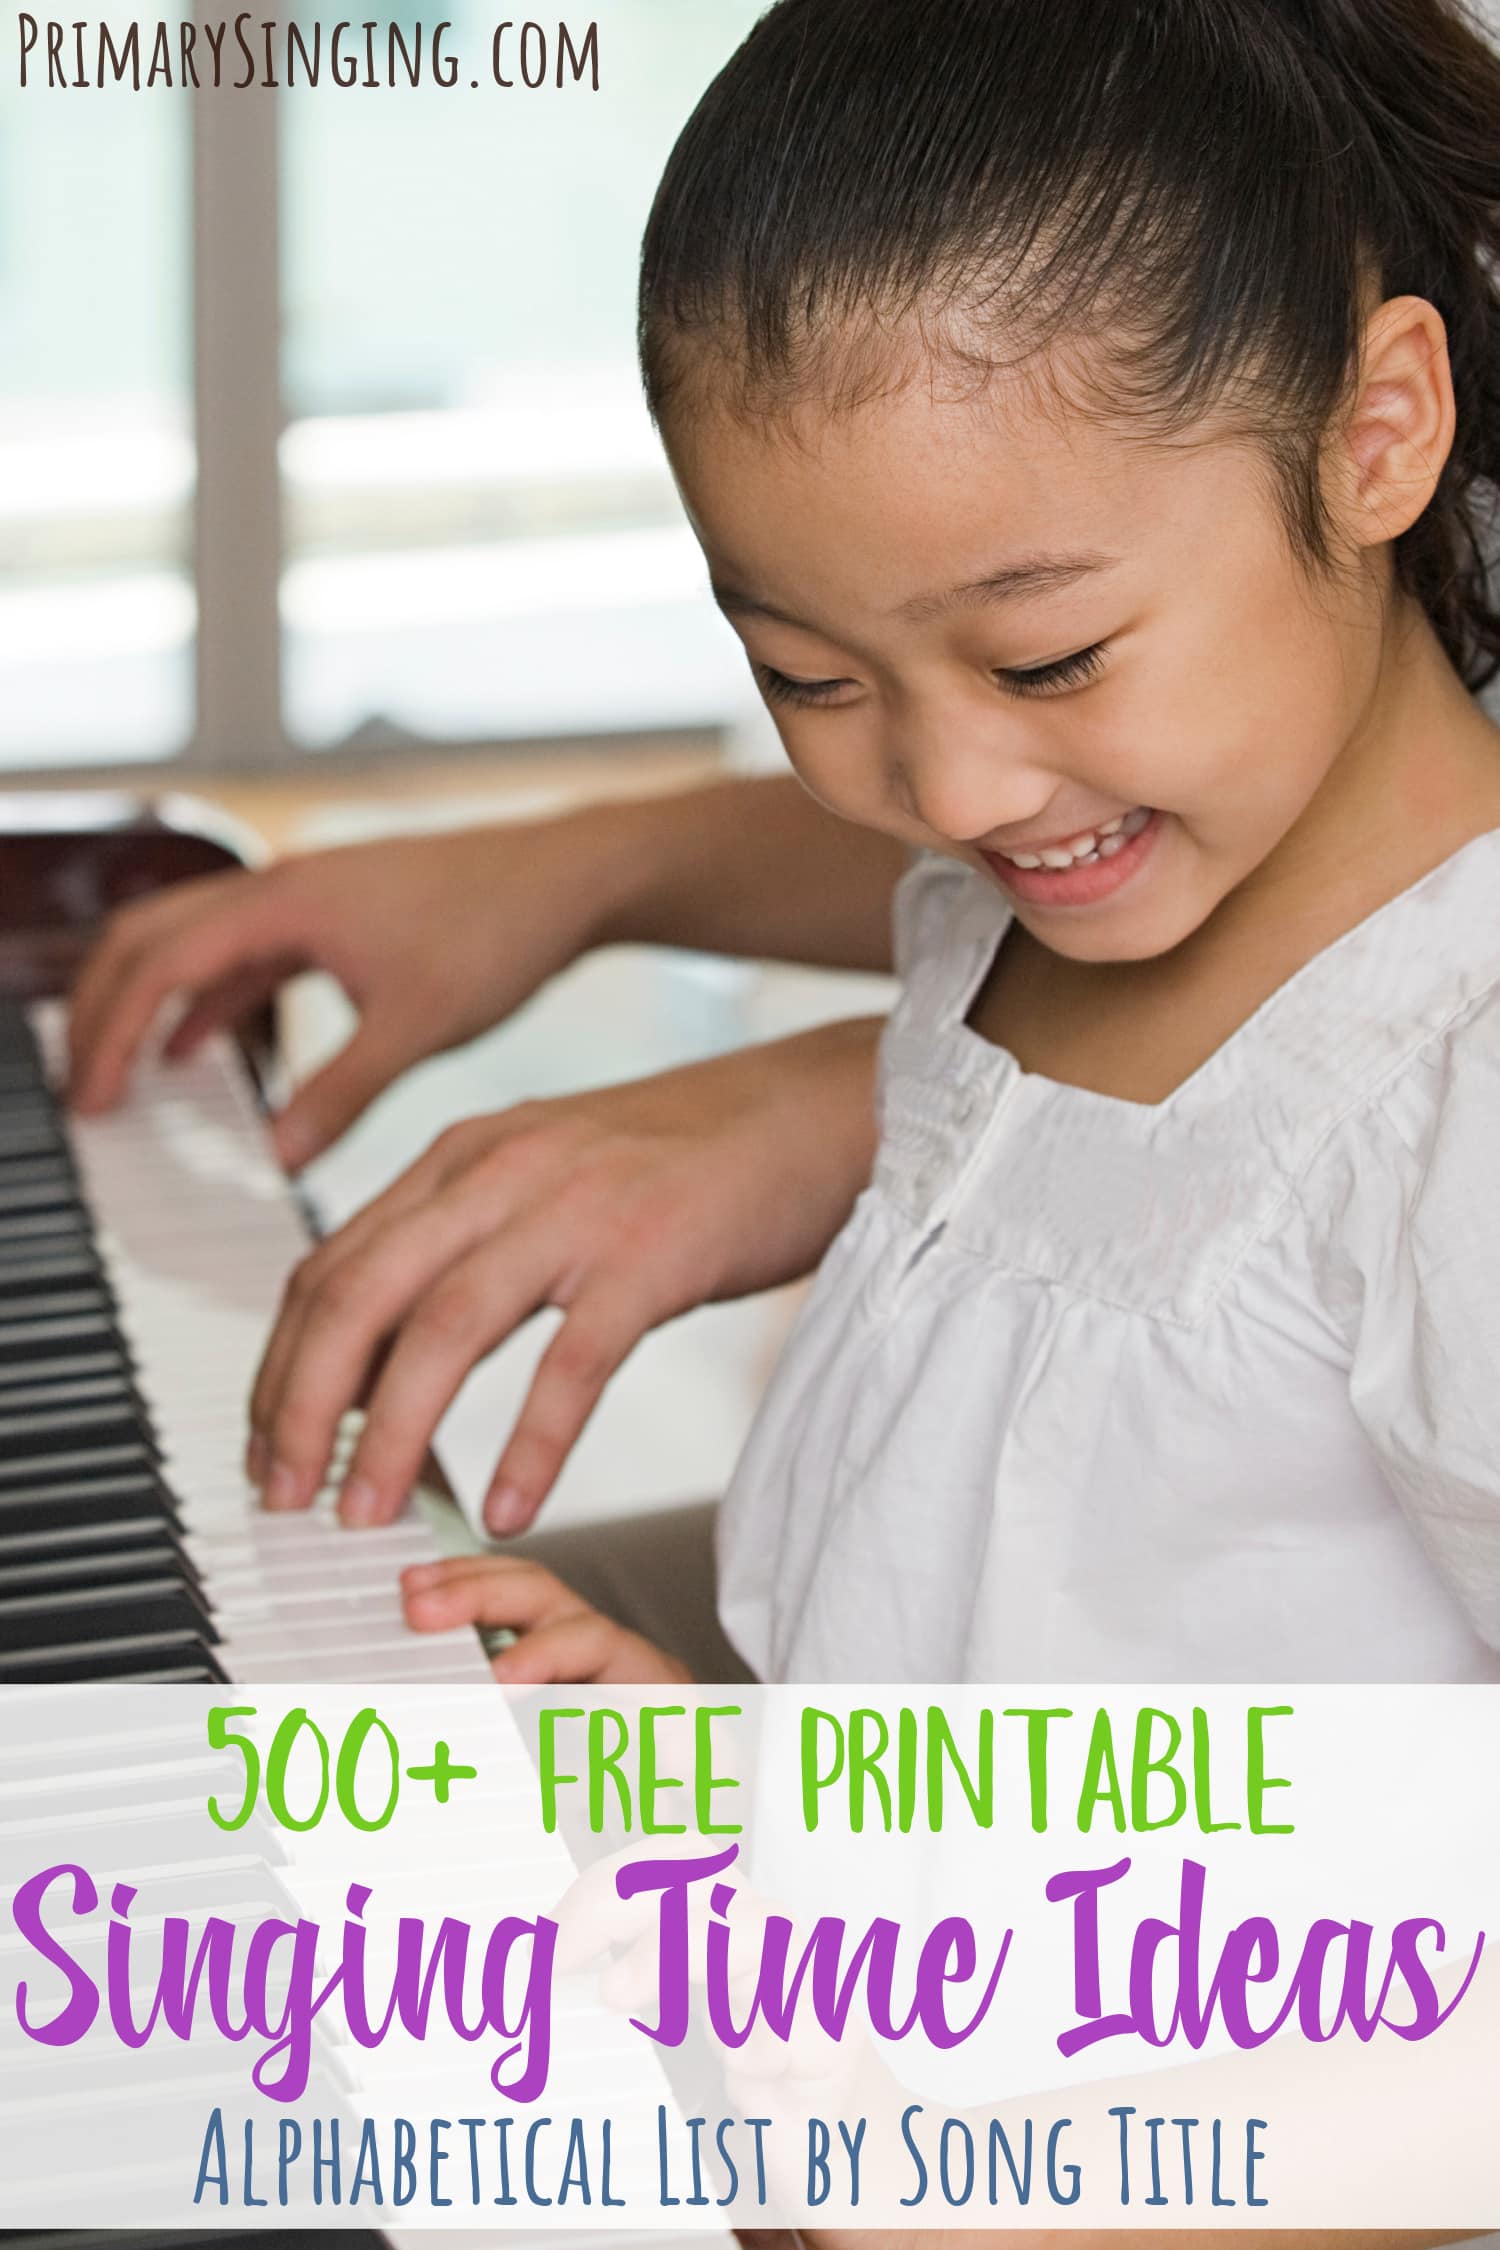 Come Follow Me Primary Songs List for all 4 year - Old Testament, New Testament, Book of Mormon and Doctrine & Covenants (D&C) years! Find tons of singing time ideas for each of your Primary song choices in this extensive list including free printable song helps!